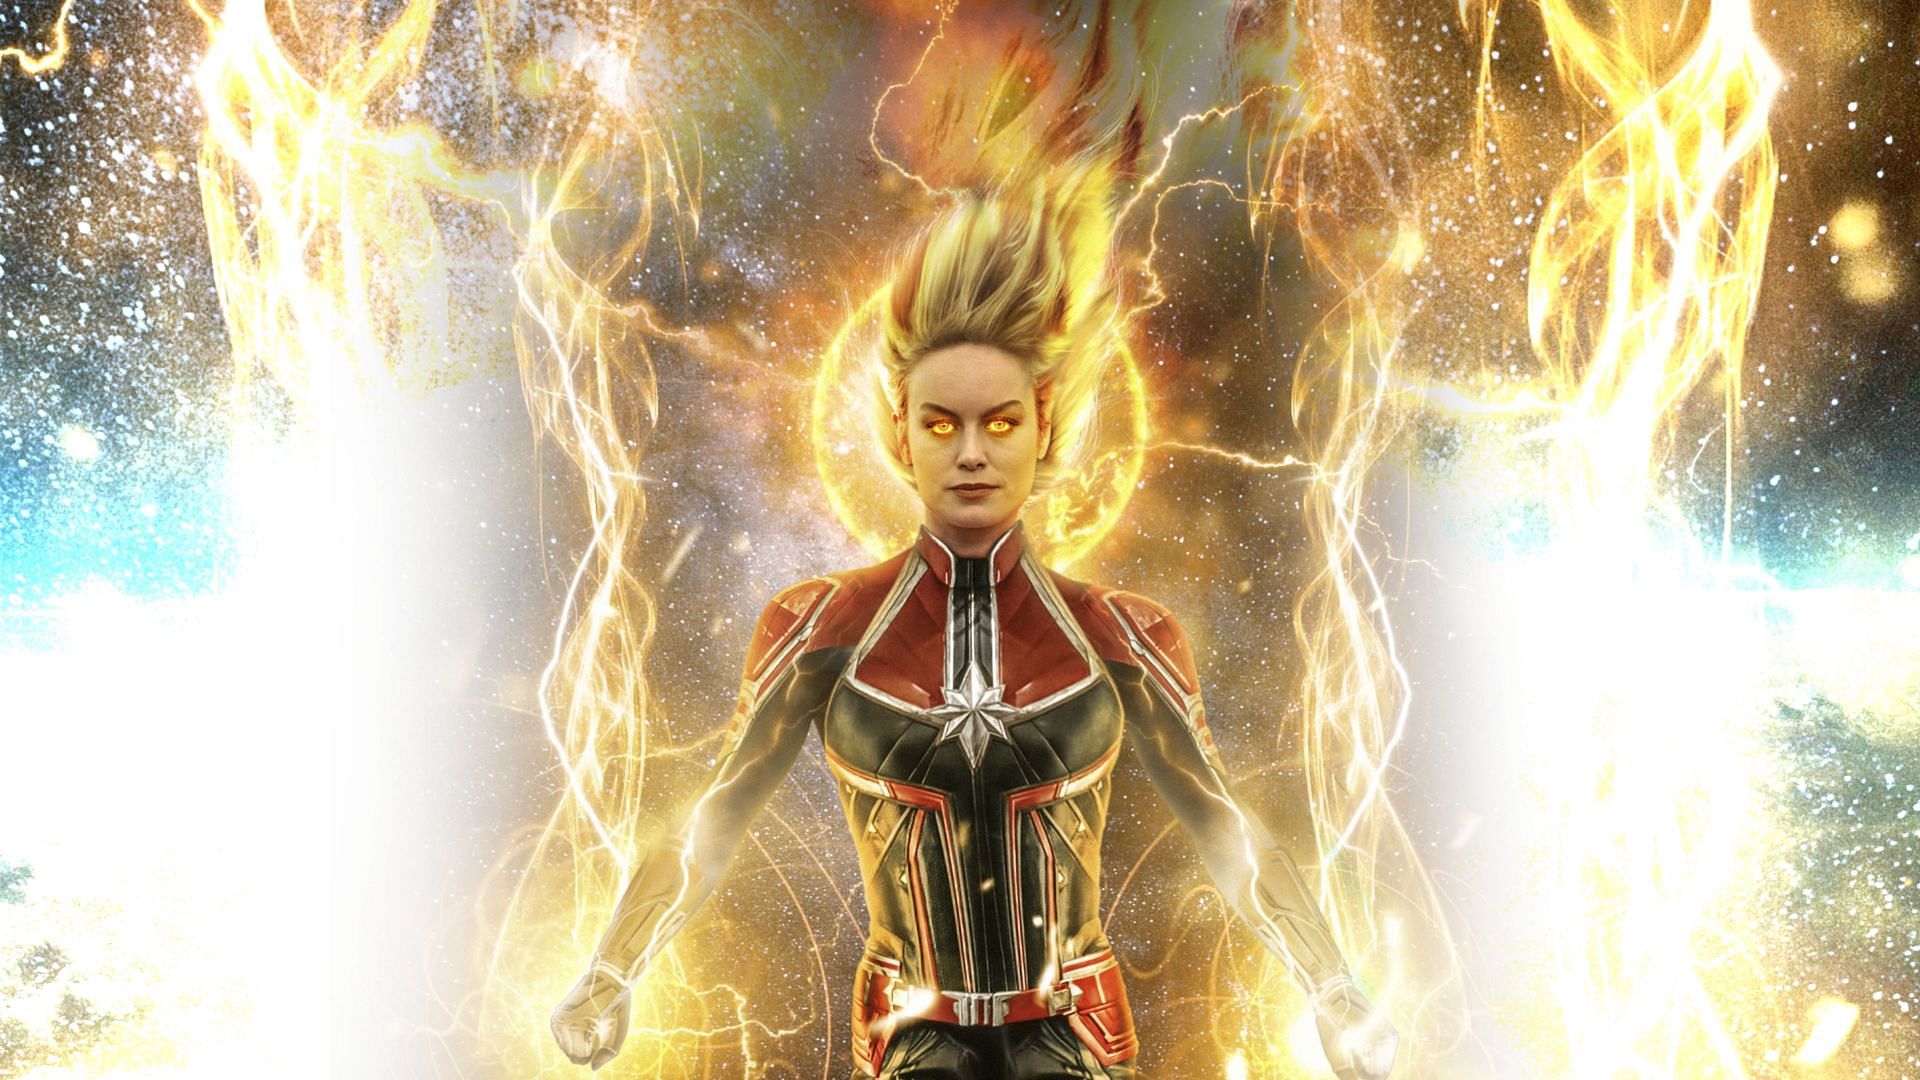 Captain Marvel was transformed into a superhero after being exposed to the energy of an alien device.(Image via Sportskeeda)